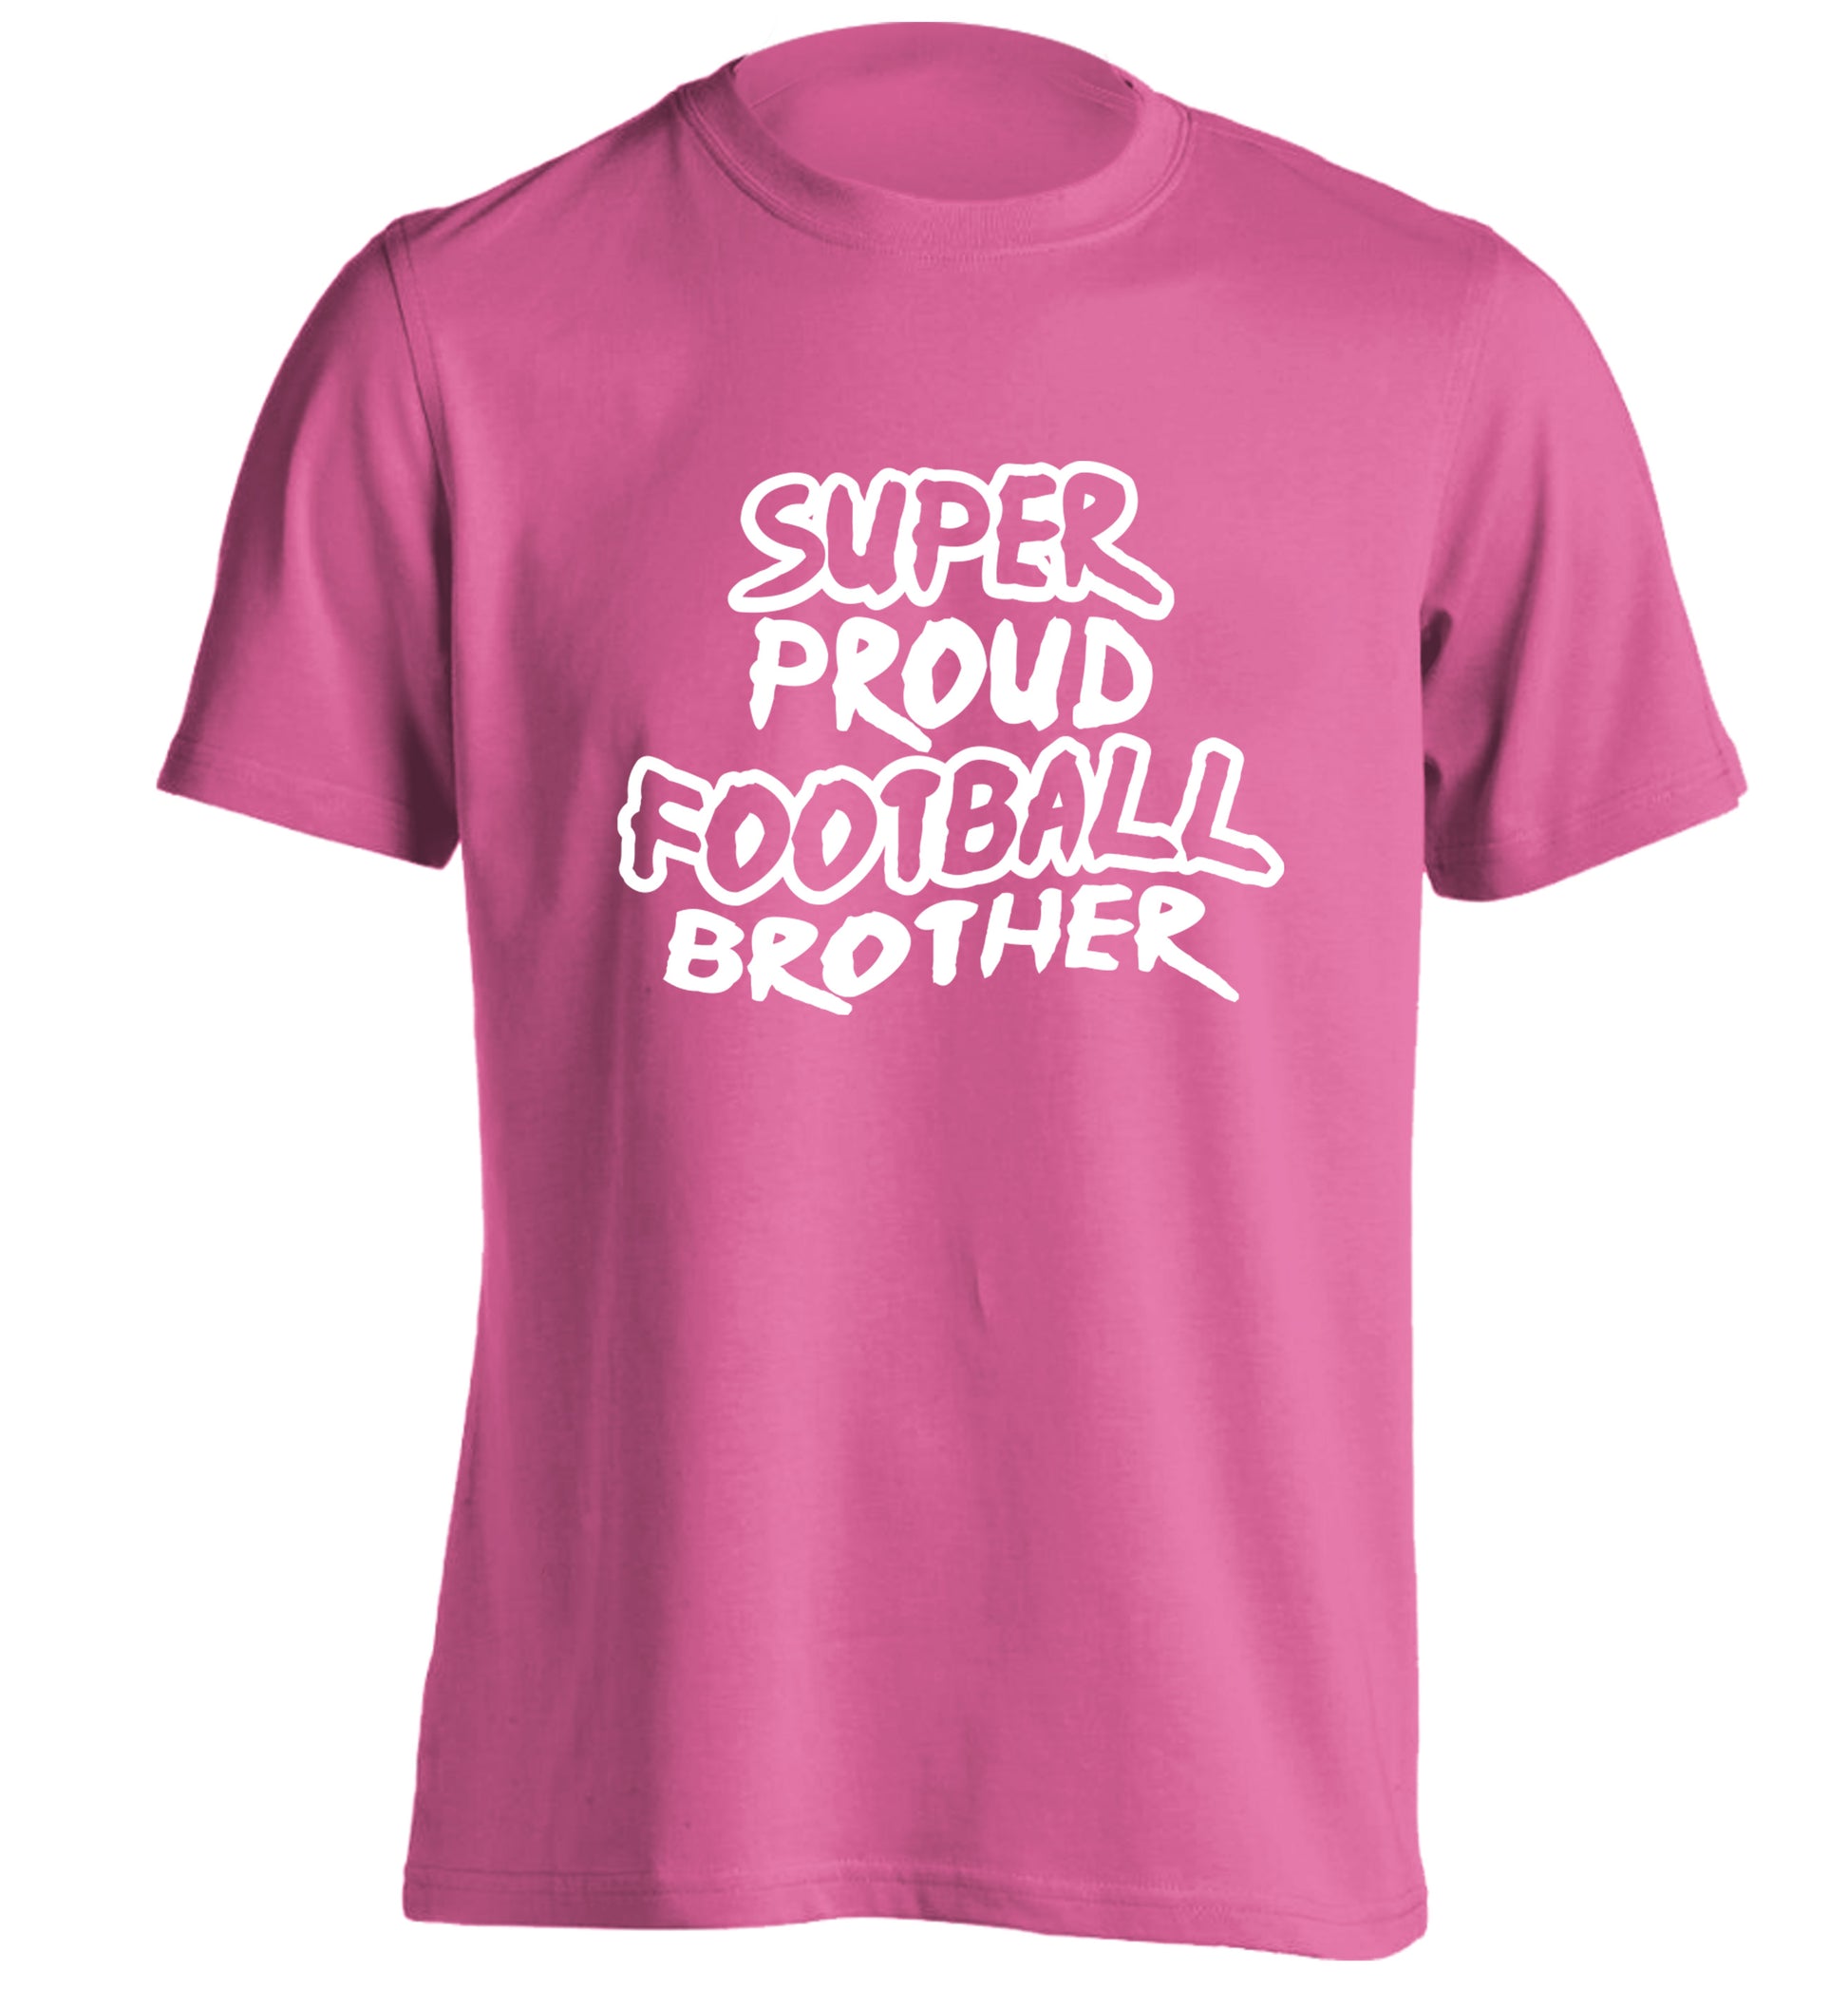 Super proud football brother adults unisexpink Tshirt 2XL